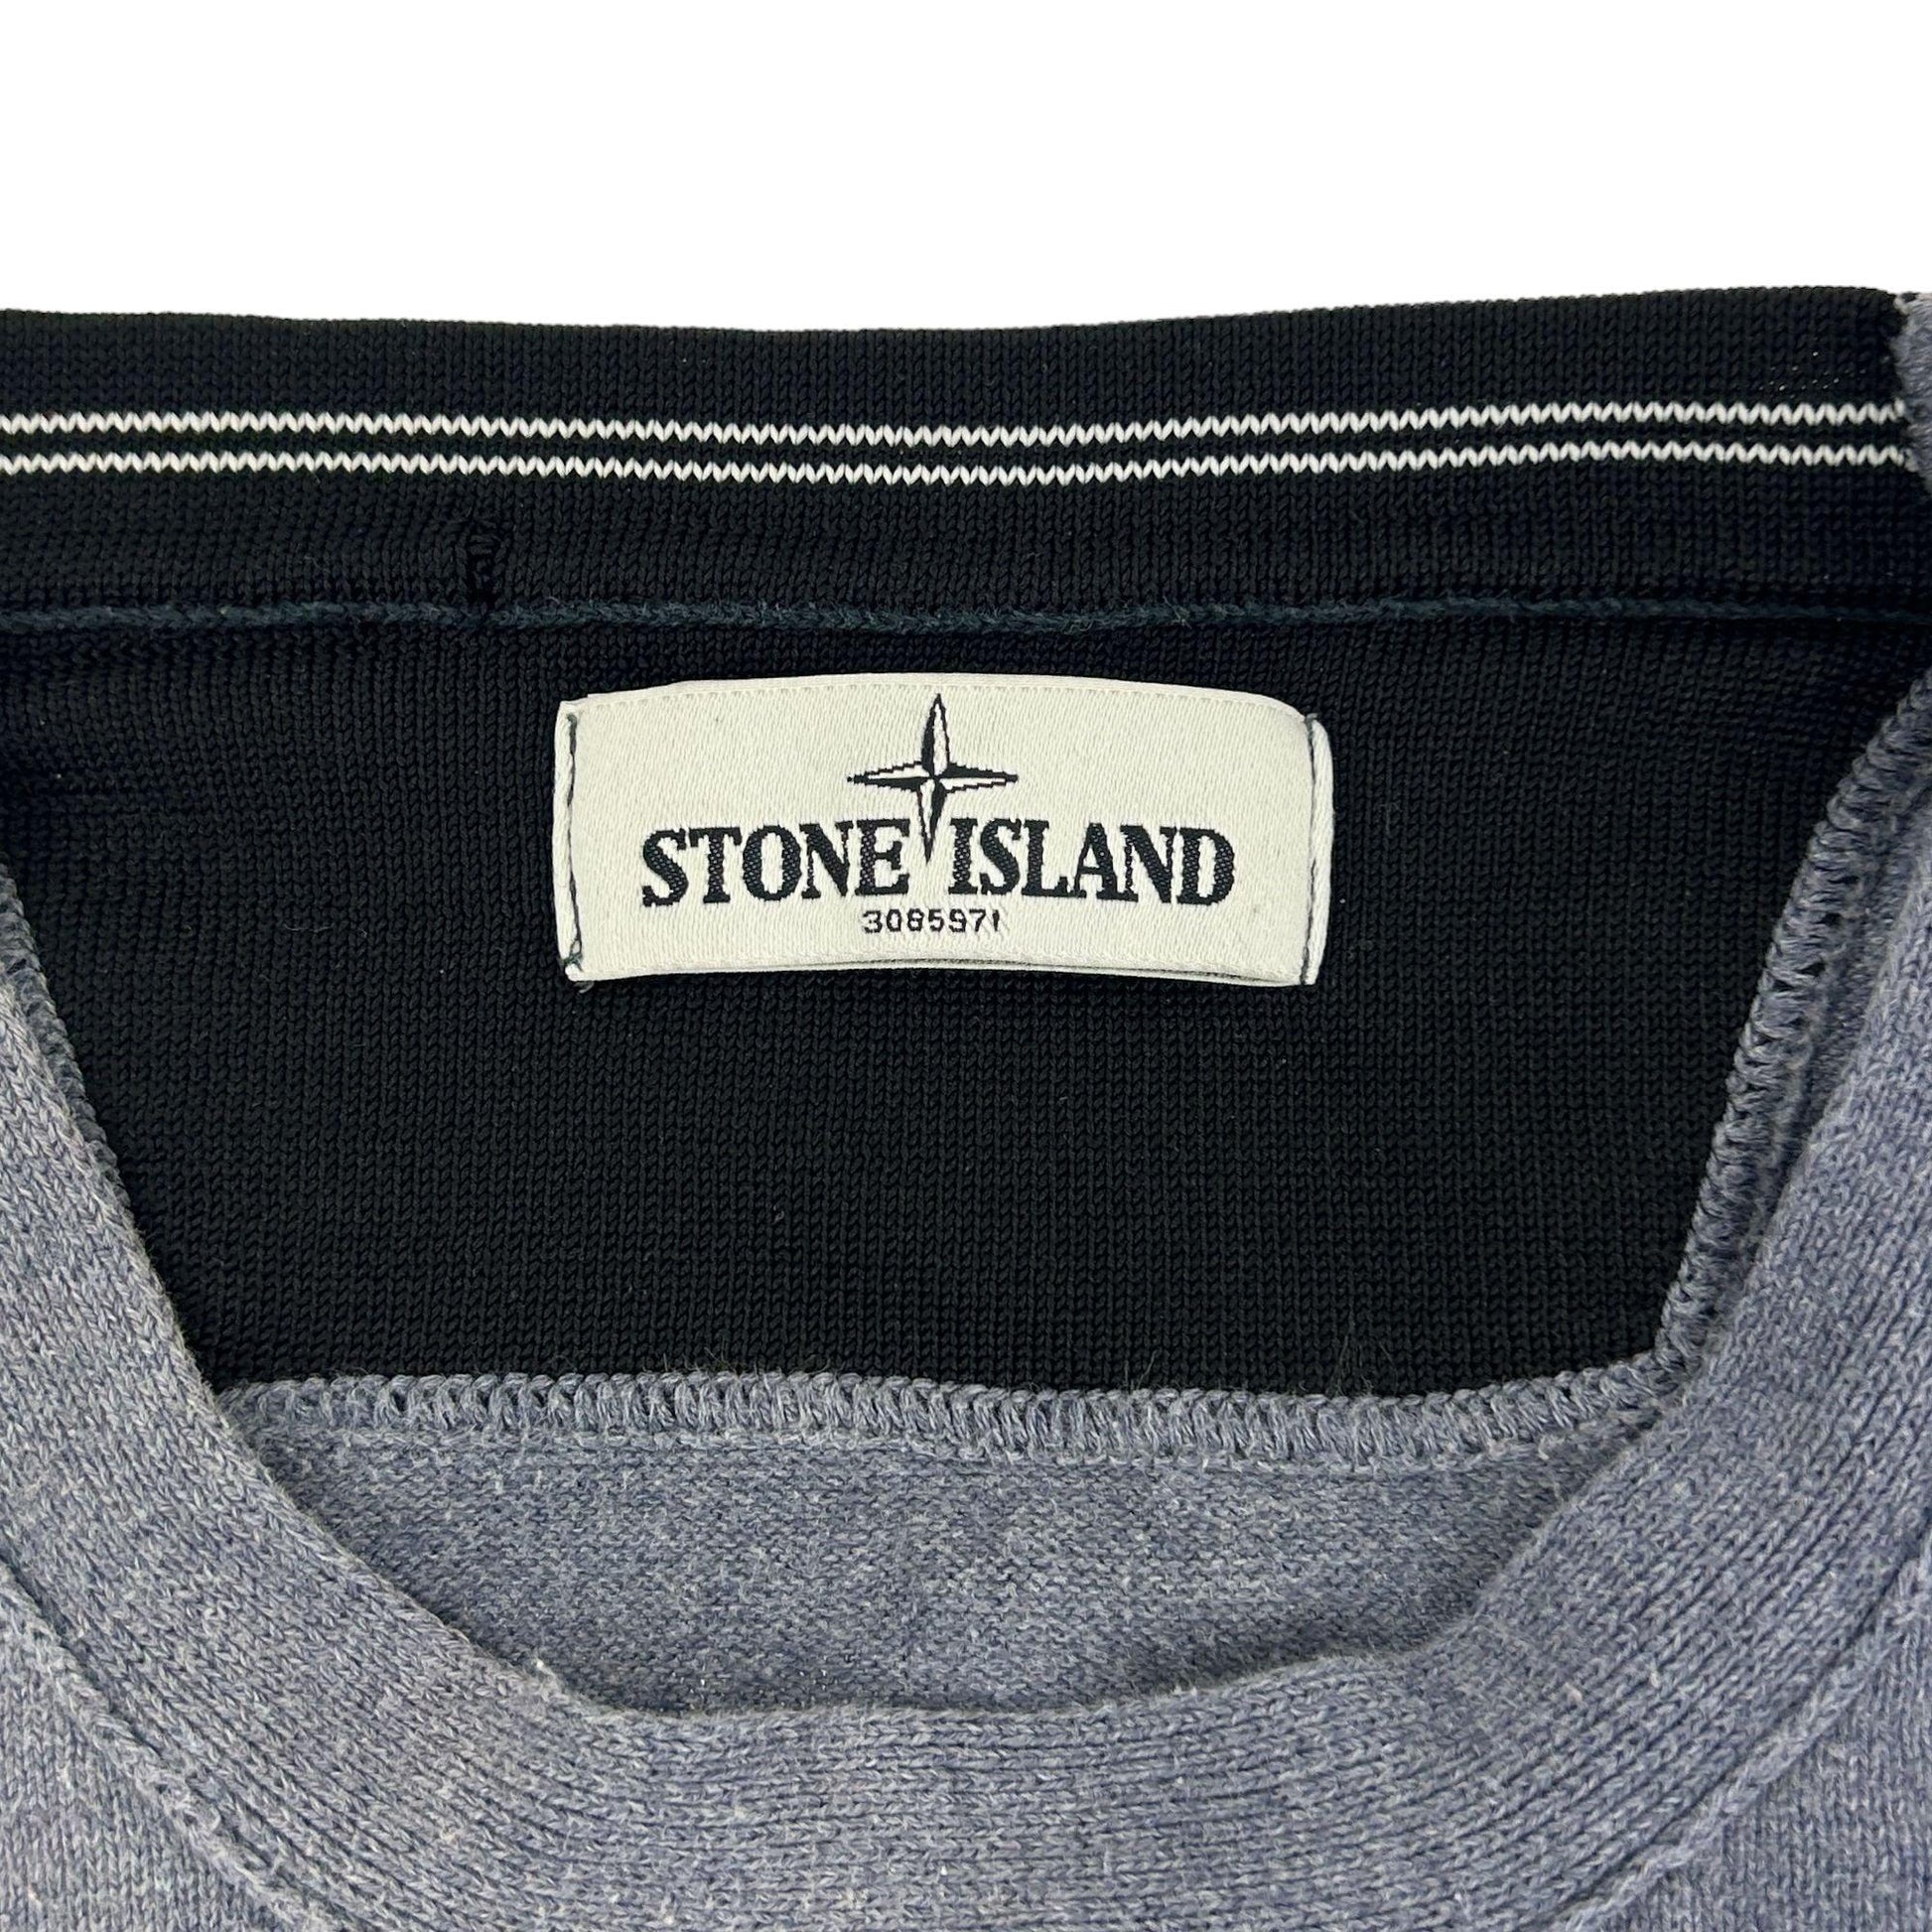 Vintage Stone Island Knitted Jumper Size XL - Known Source